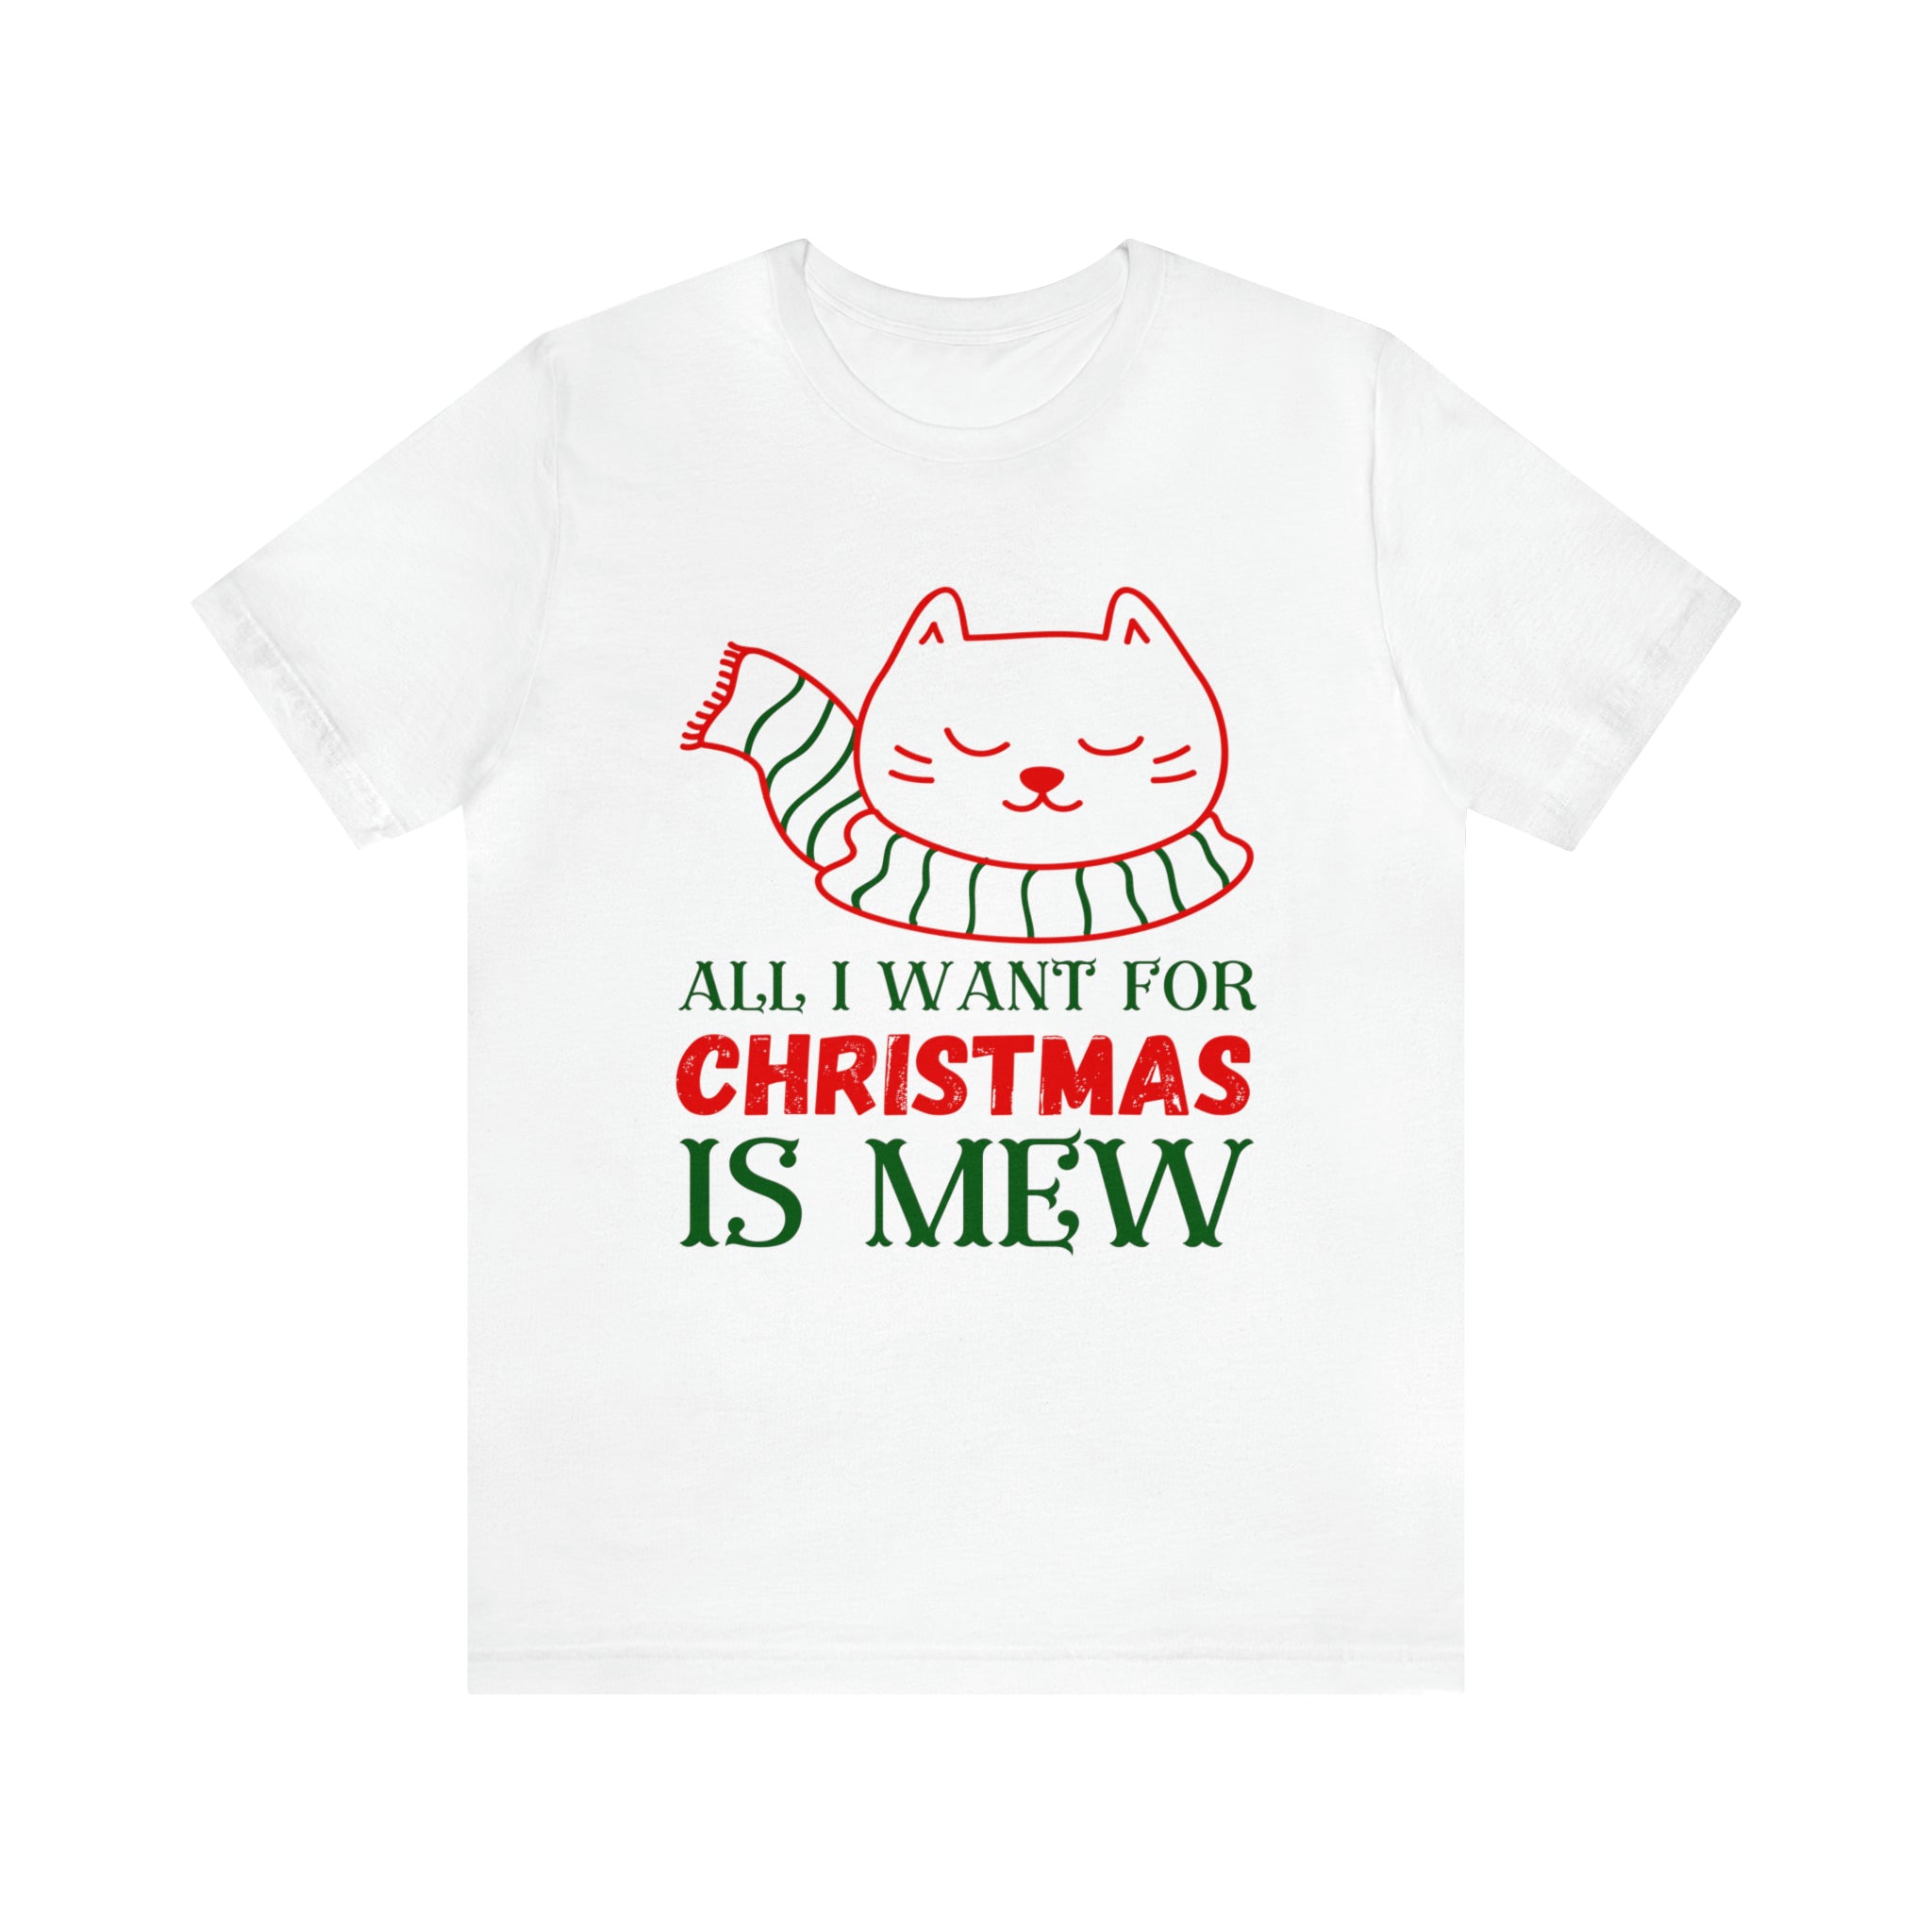 All I want for Christmas is Mew tshirt